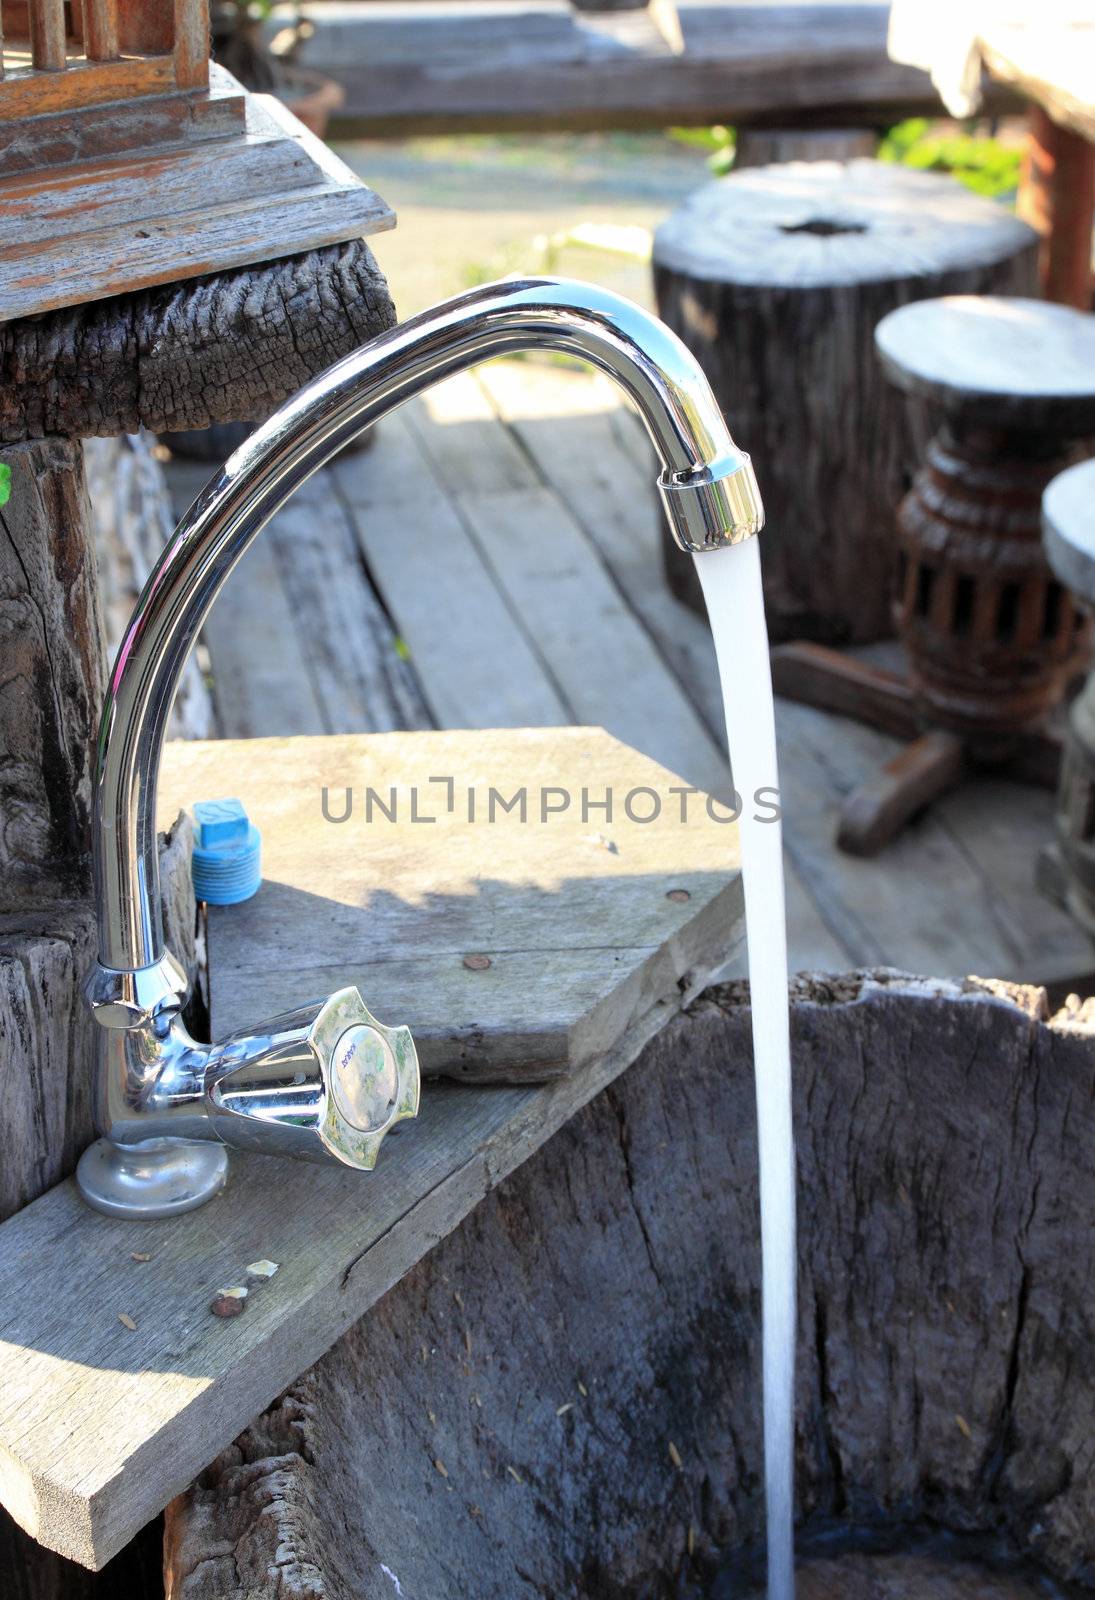 Lifestyle-a faucet with water flowing